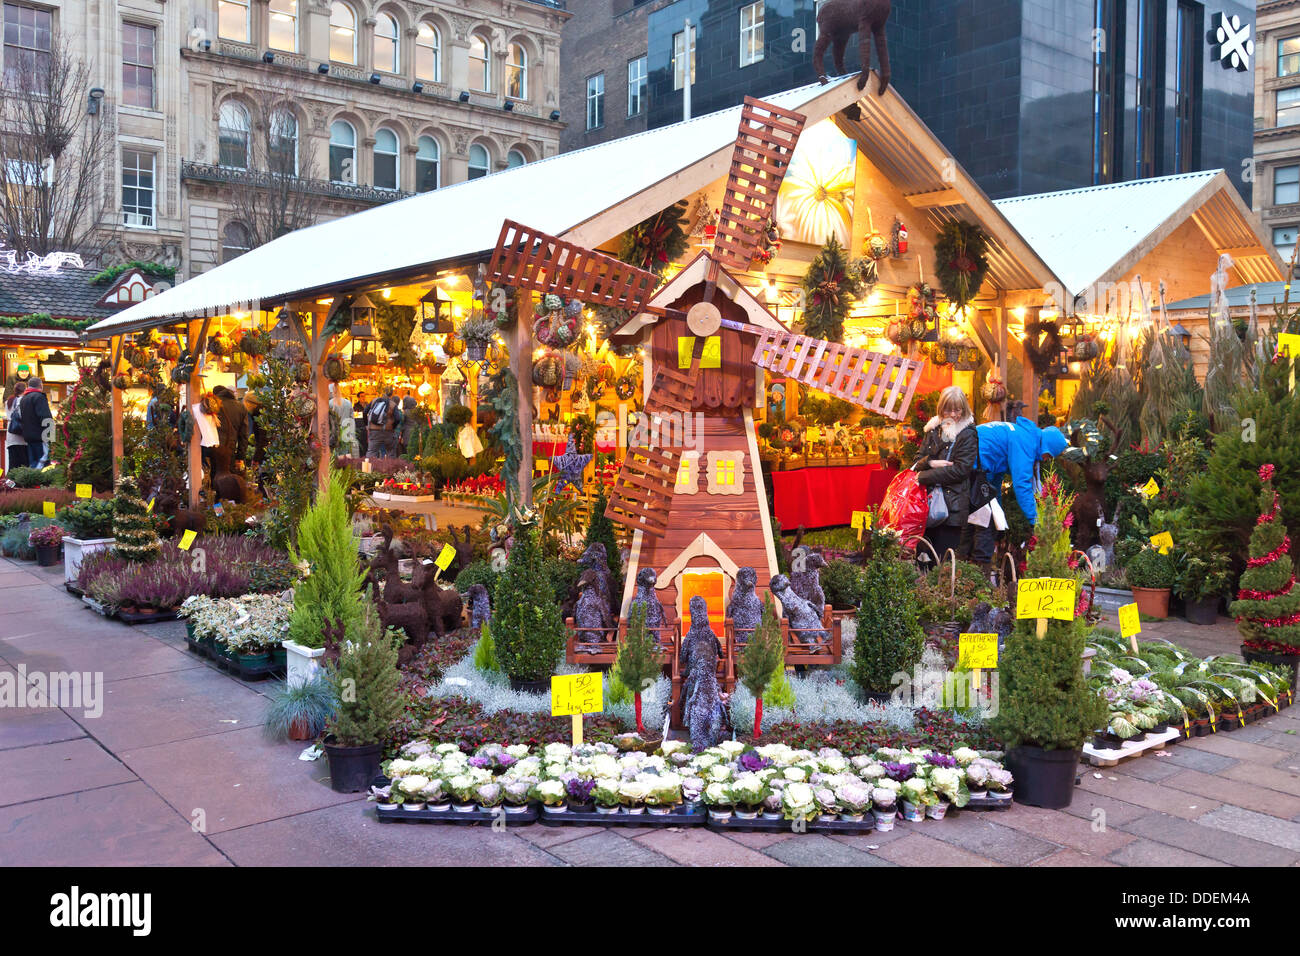 Customers browsing a stall selling potted conifers, wreaths and decorations at the Christmas Market, St Enoch Square, Glasgow Stock Photo